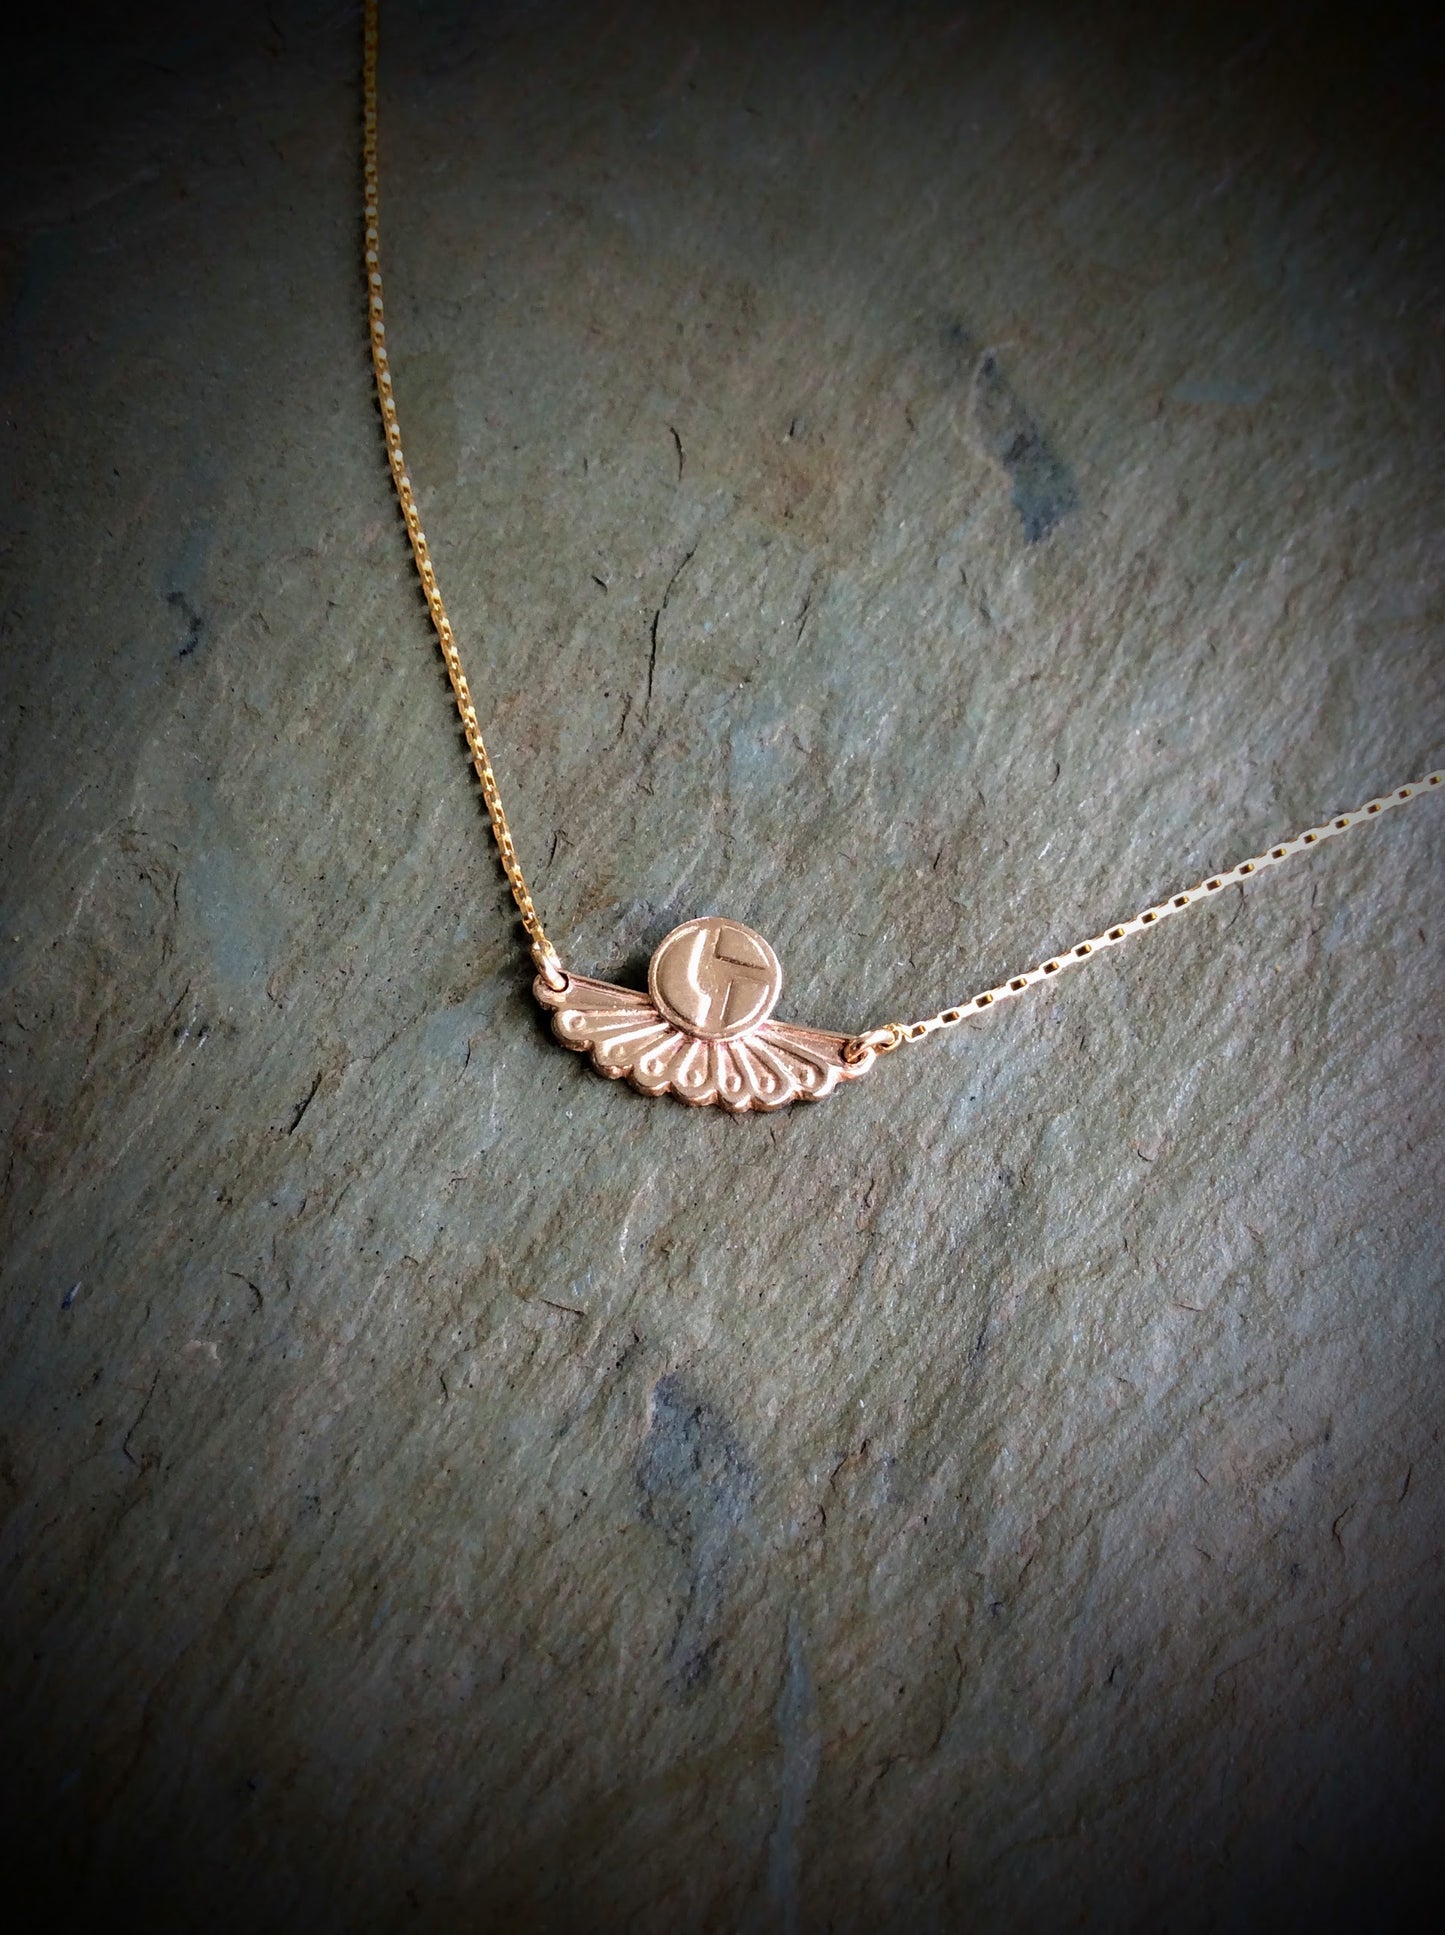 Disco Biscuits Fan Bar Necklace // Sterling Silver or Bronze with 14K Gold Filled